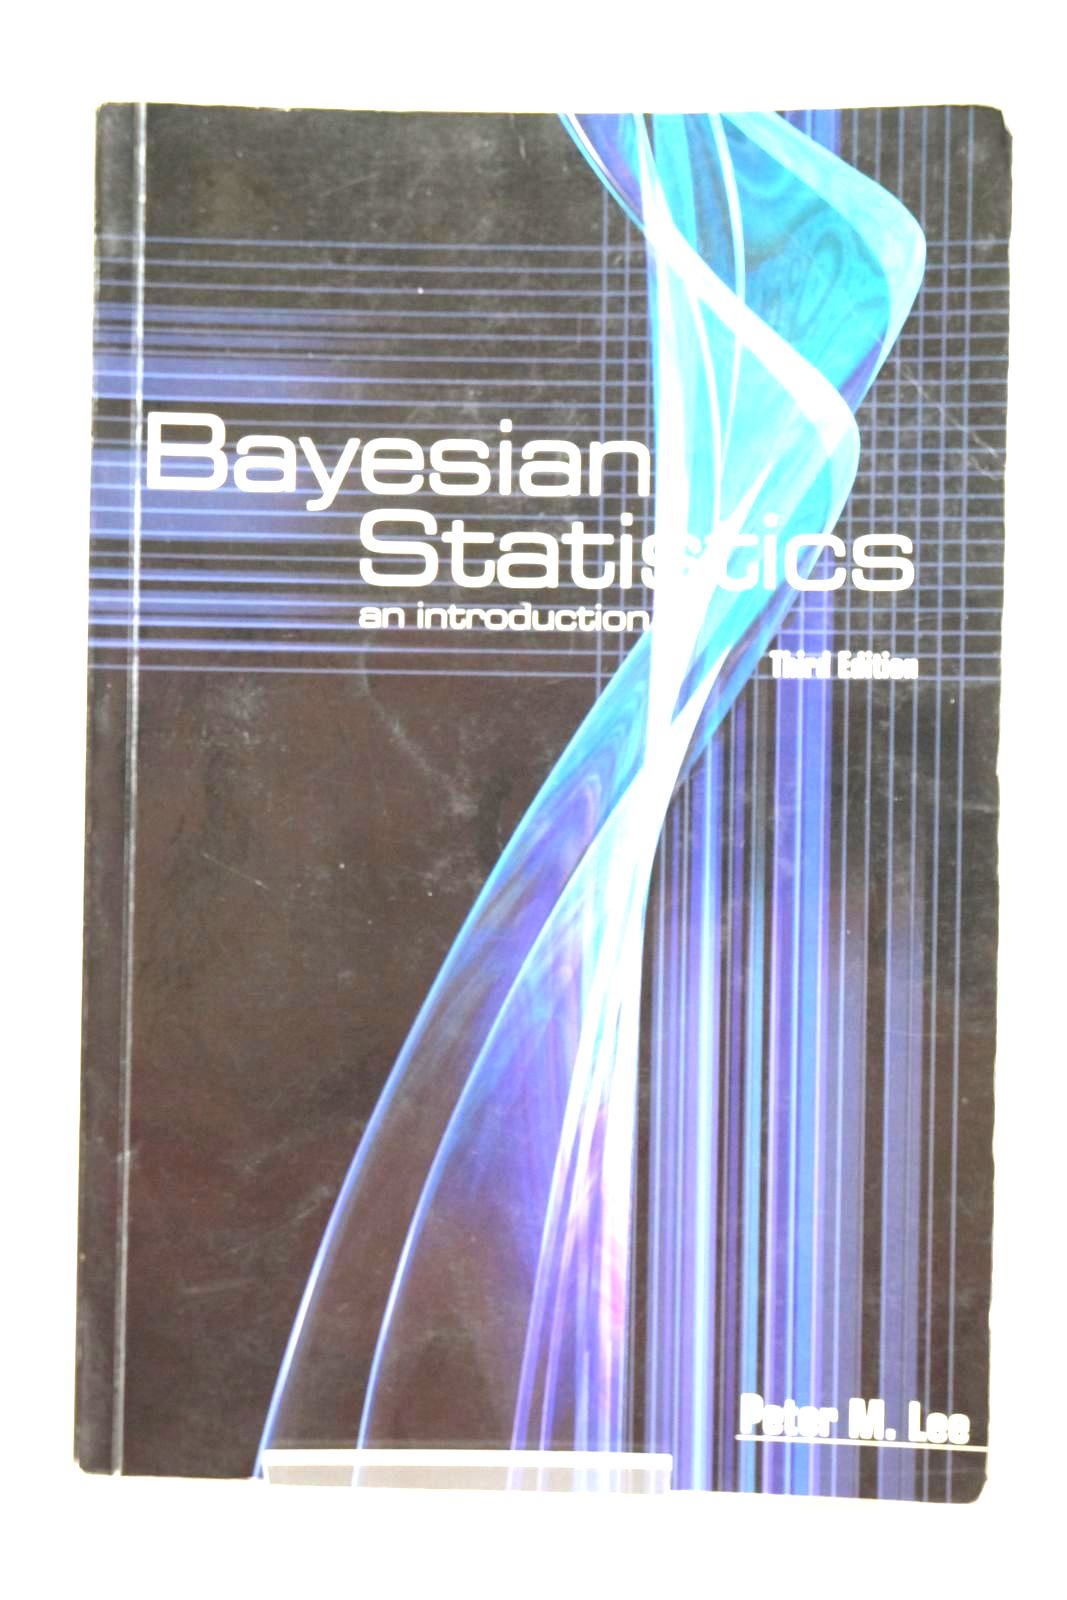 Photo of BAYESIAN STATISTICS AN INTRODUCTION written by Lee, Peter M. published by Arnold (STOCK CODE: 1319624)  for sale by Stella & Rose's Books